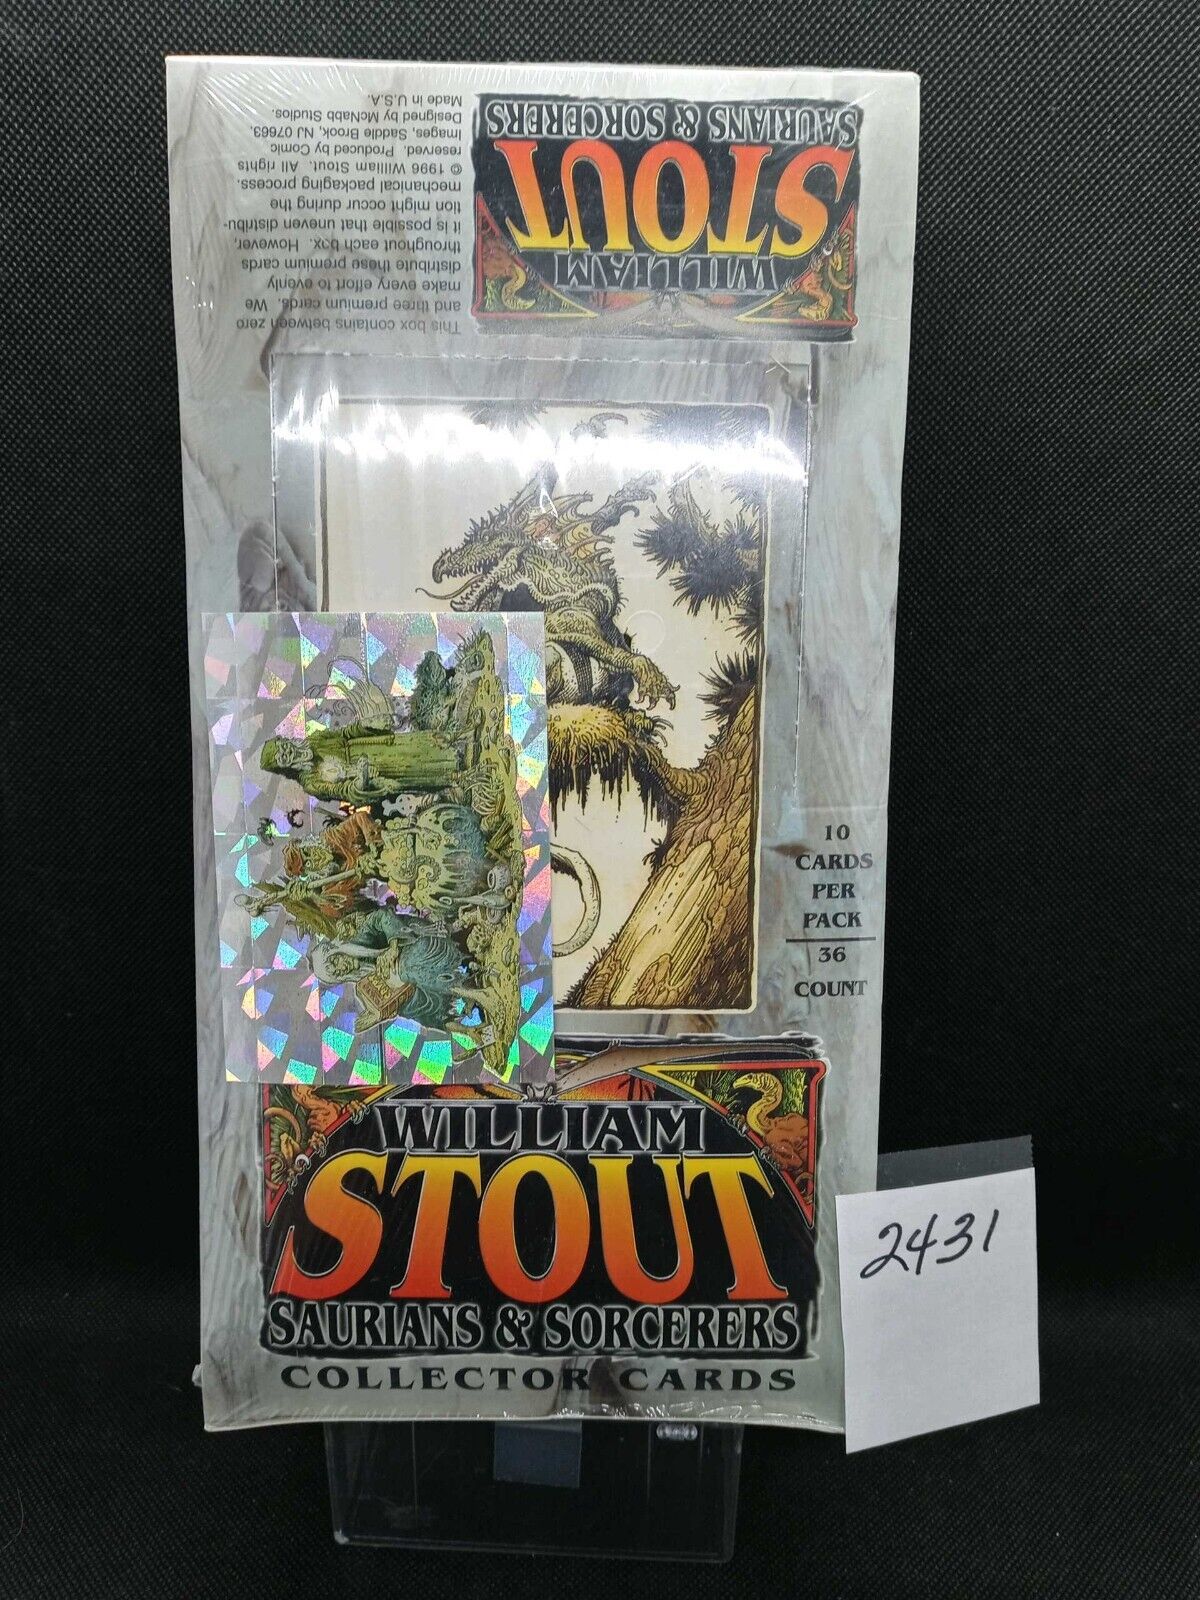 1996 WILLIAM STOUT SAURIANS SORCERERS COLLECTORS CARDS SEALED BOX RARE